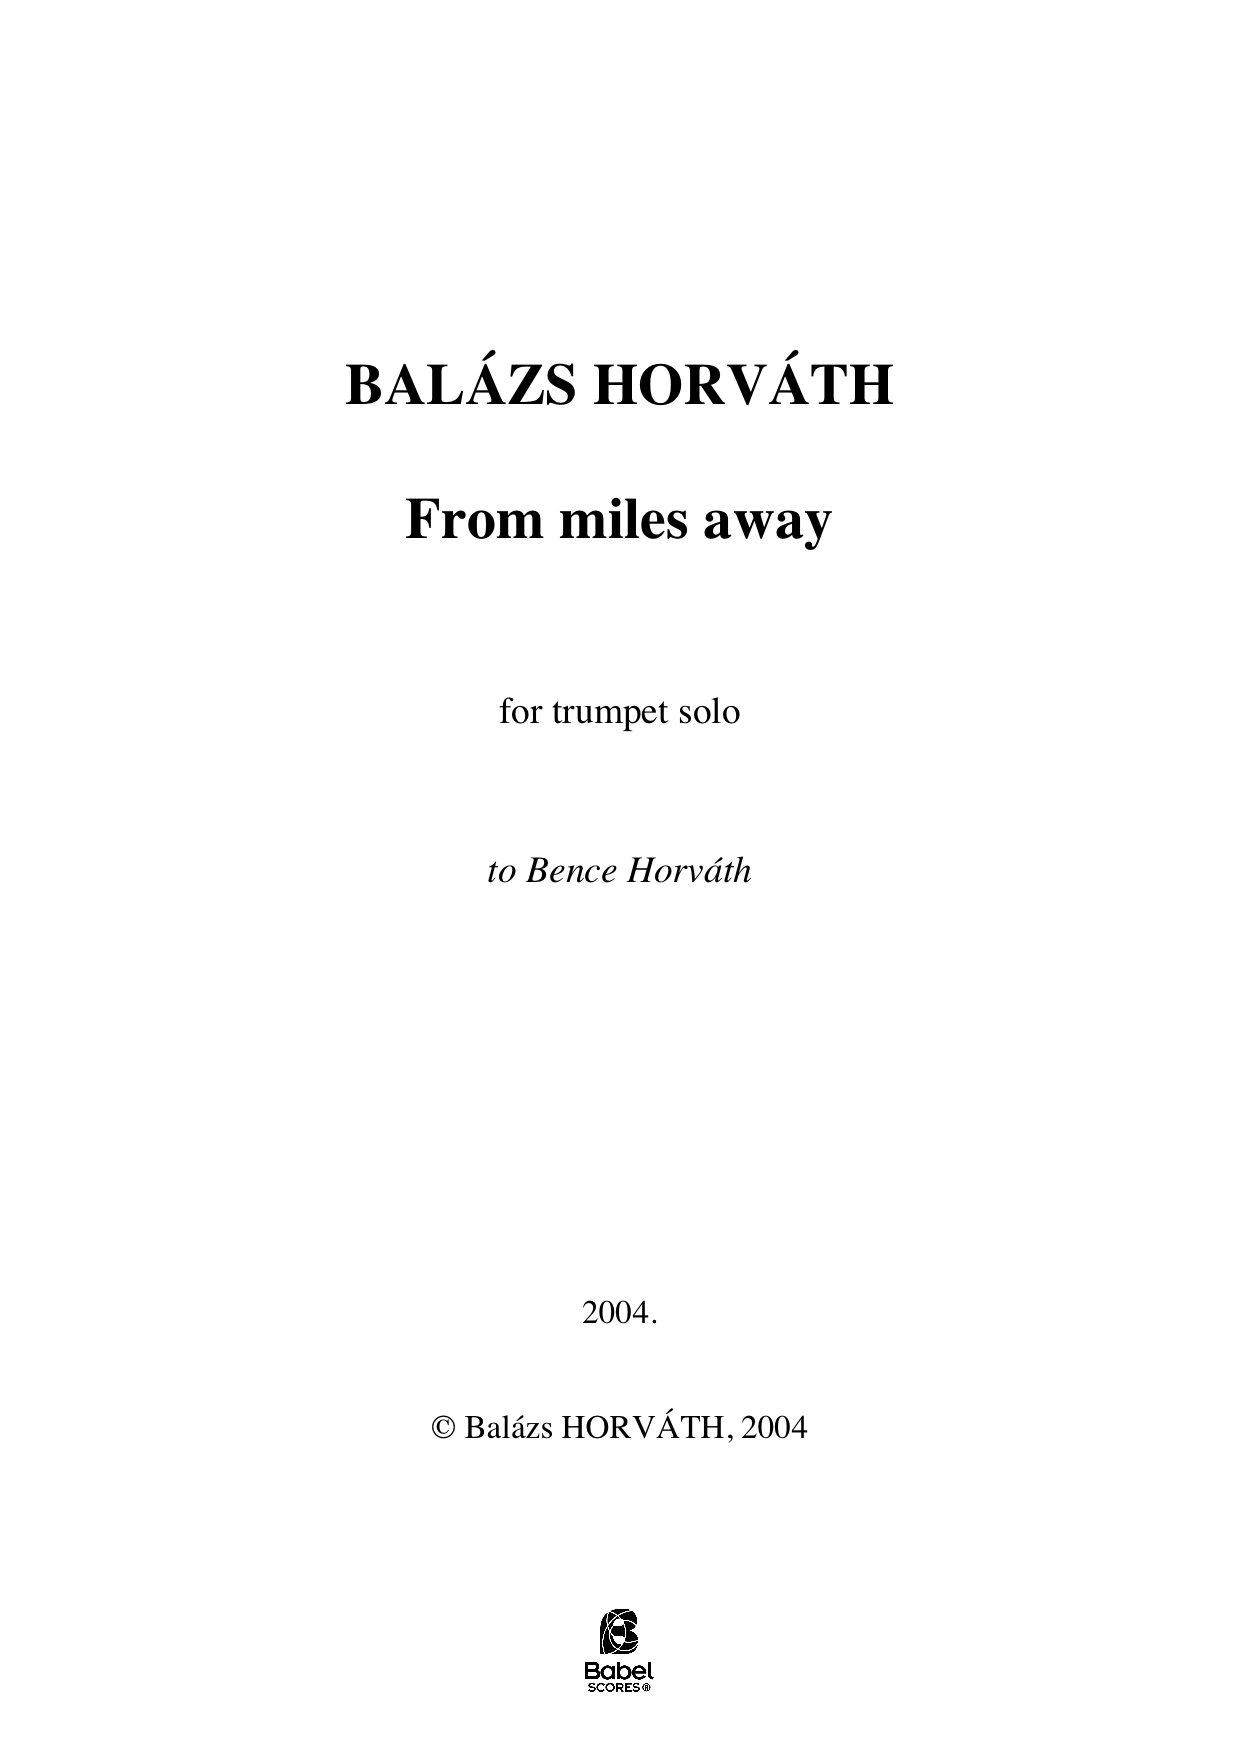 From miles away Balazs HORVATH A4 z 1 577